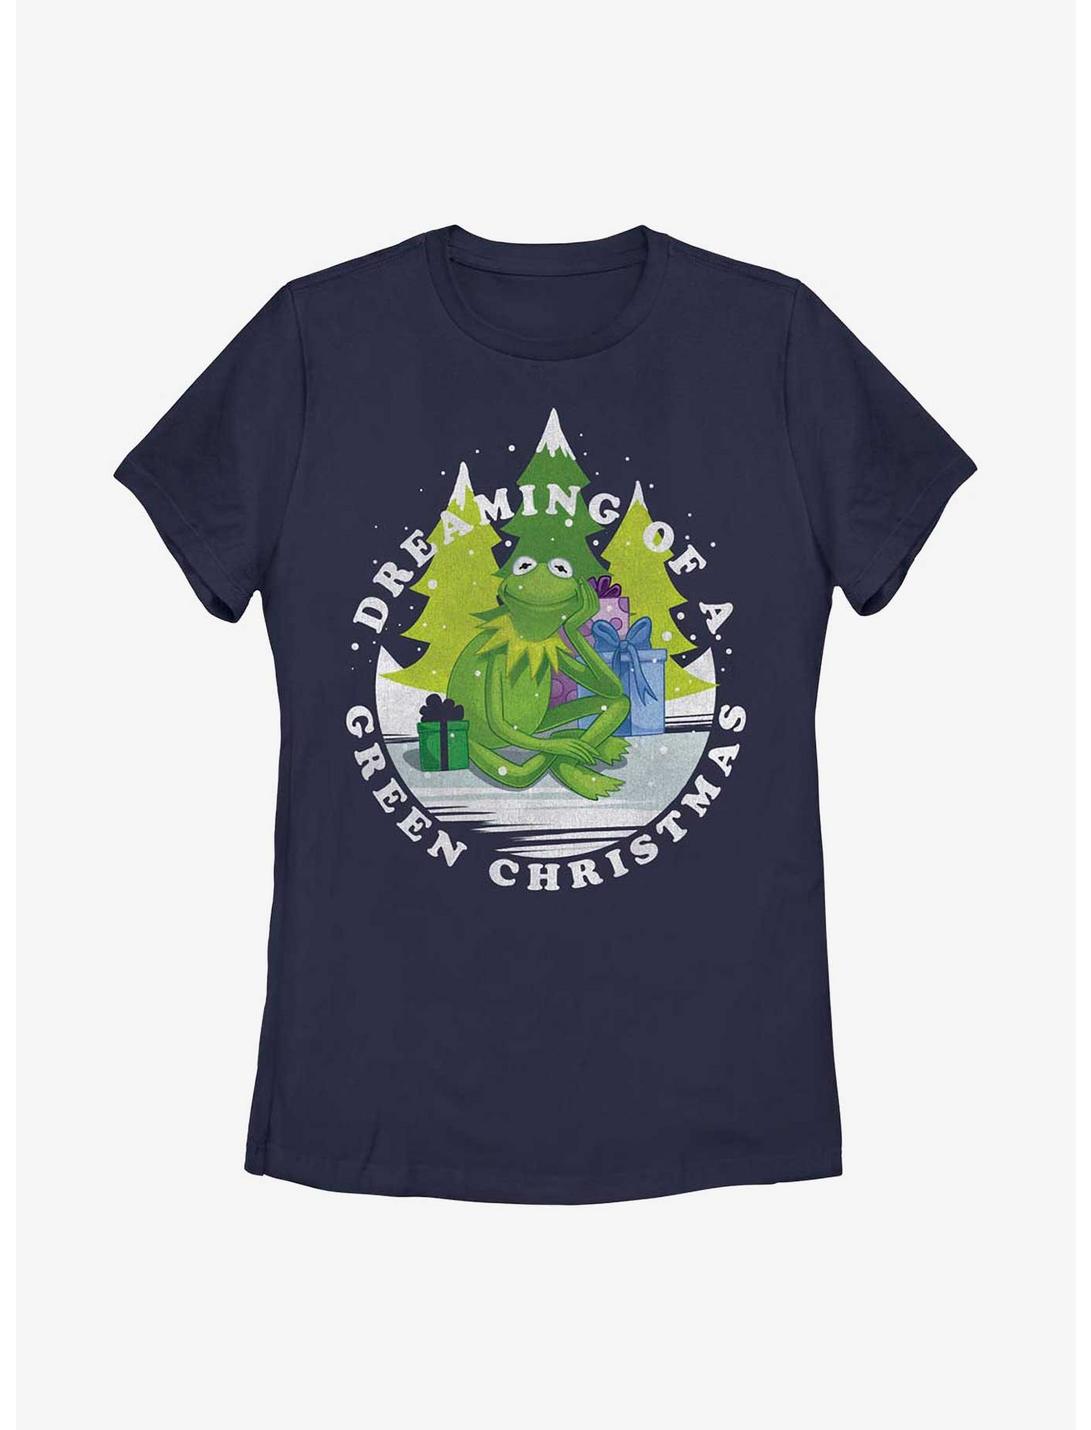 Disney The Muppets Dreaming Of A Green Christmas Womens T-Shirt, NAVY, hi-res